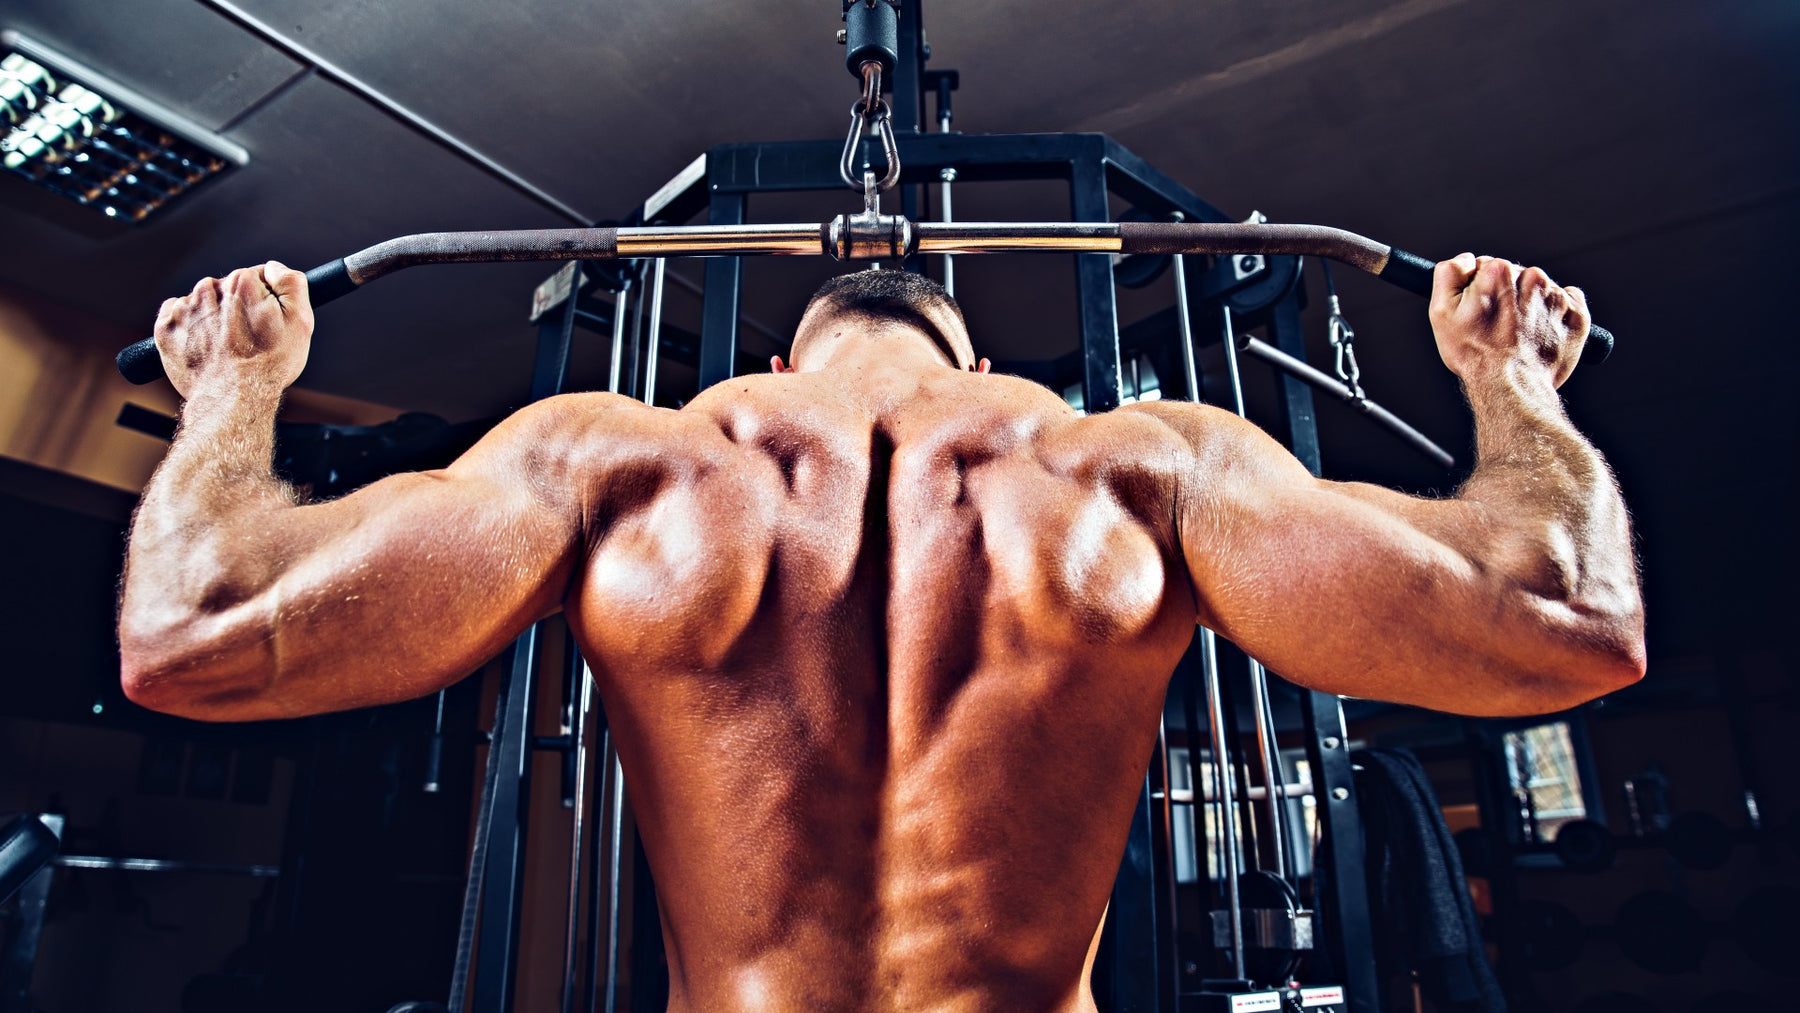 Your First Muscle Building Workout